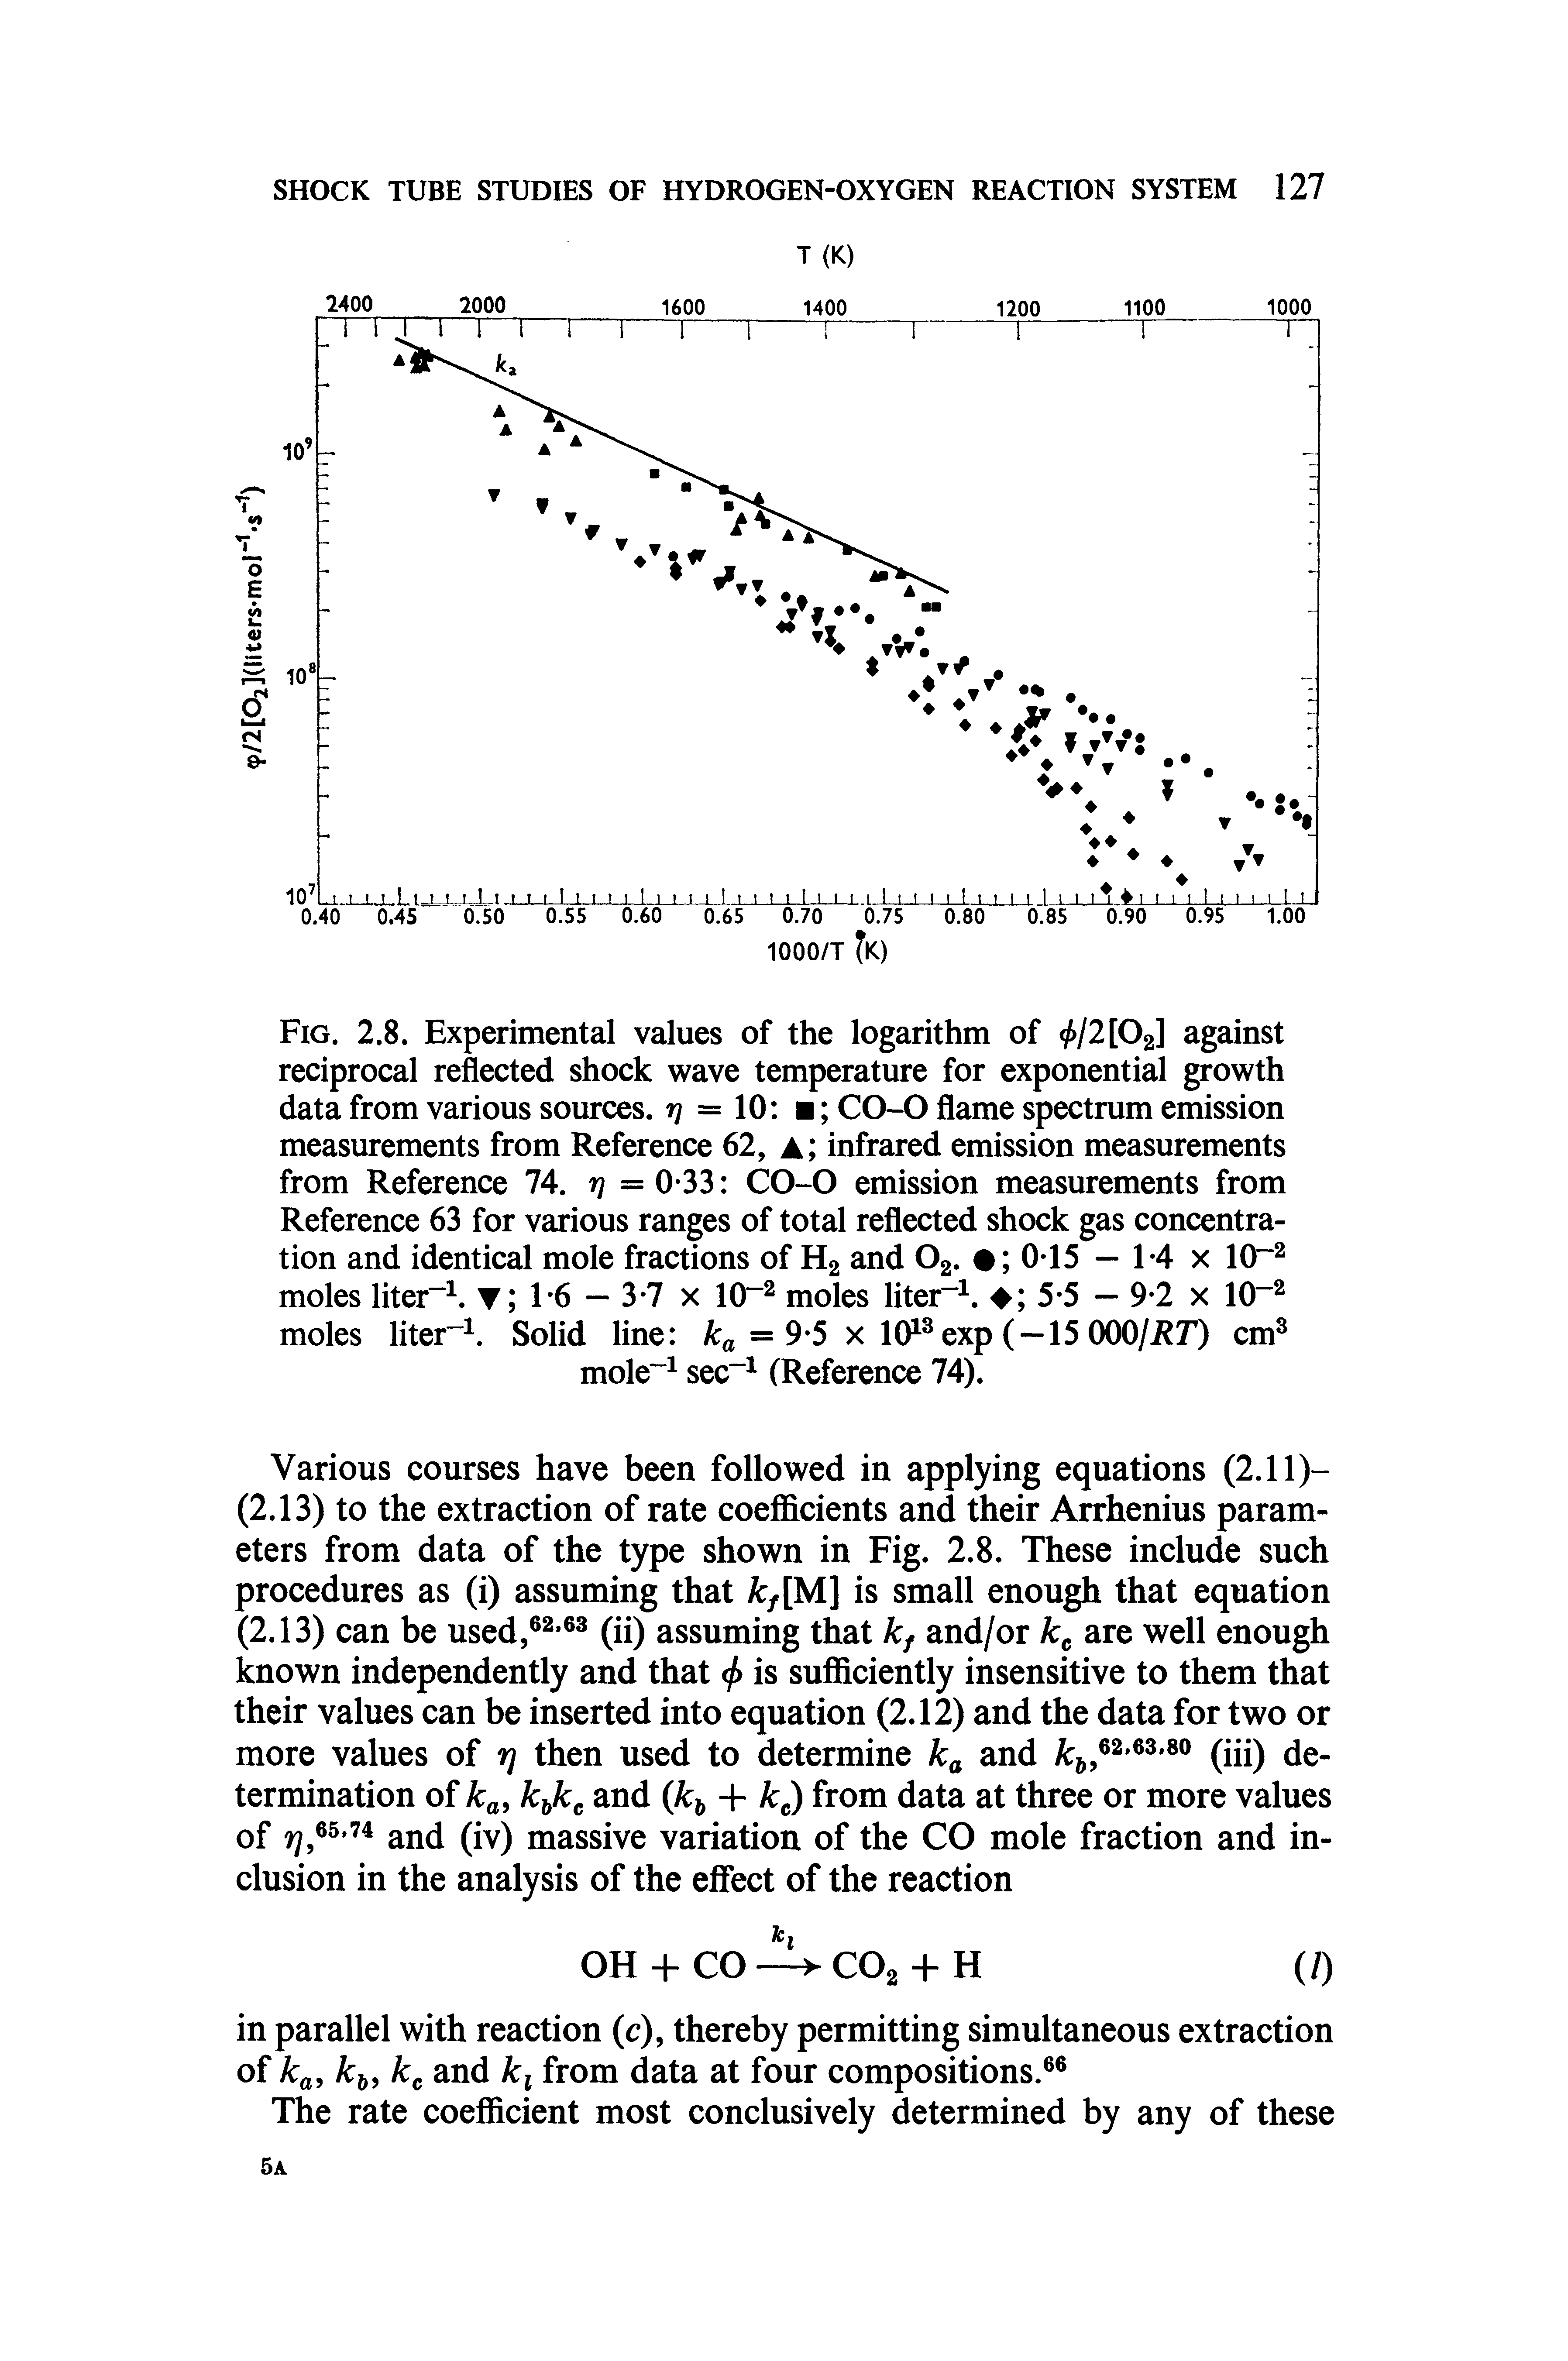 Fig. 2.8. Experimental values of the logarithm of /2[02l against reciprocal reflected shock wave temperature for exponential growth data from various sources. 17 = 10 CO-0 flame spectrum emission measurements from Reference 62, a infrared emission measurements from Reference 74. rj = 0 33 C0 0 emission measurements from Reference 63 for various ranges of total reflected shock gas concentration and identical mole fractions of H2 and O2. 015 — 1 4 x lO moles liter . t 1 6 — 3-7 x 10 moles liter. 5-5 — 9 2 x 10 moles liter. Solid line = 9 5 x lO exp (—15 000/Rr) cm ...